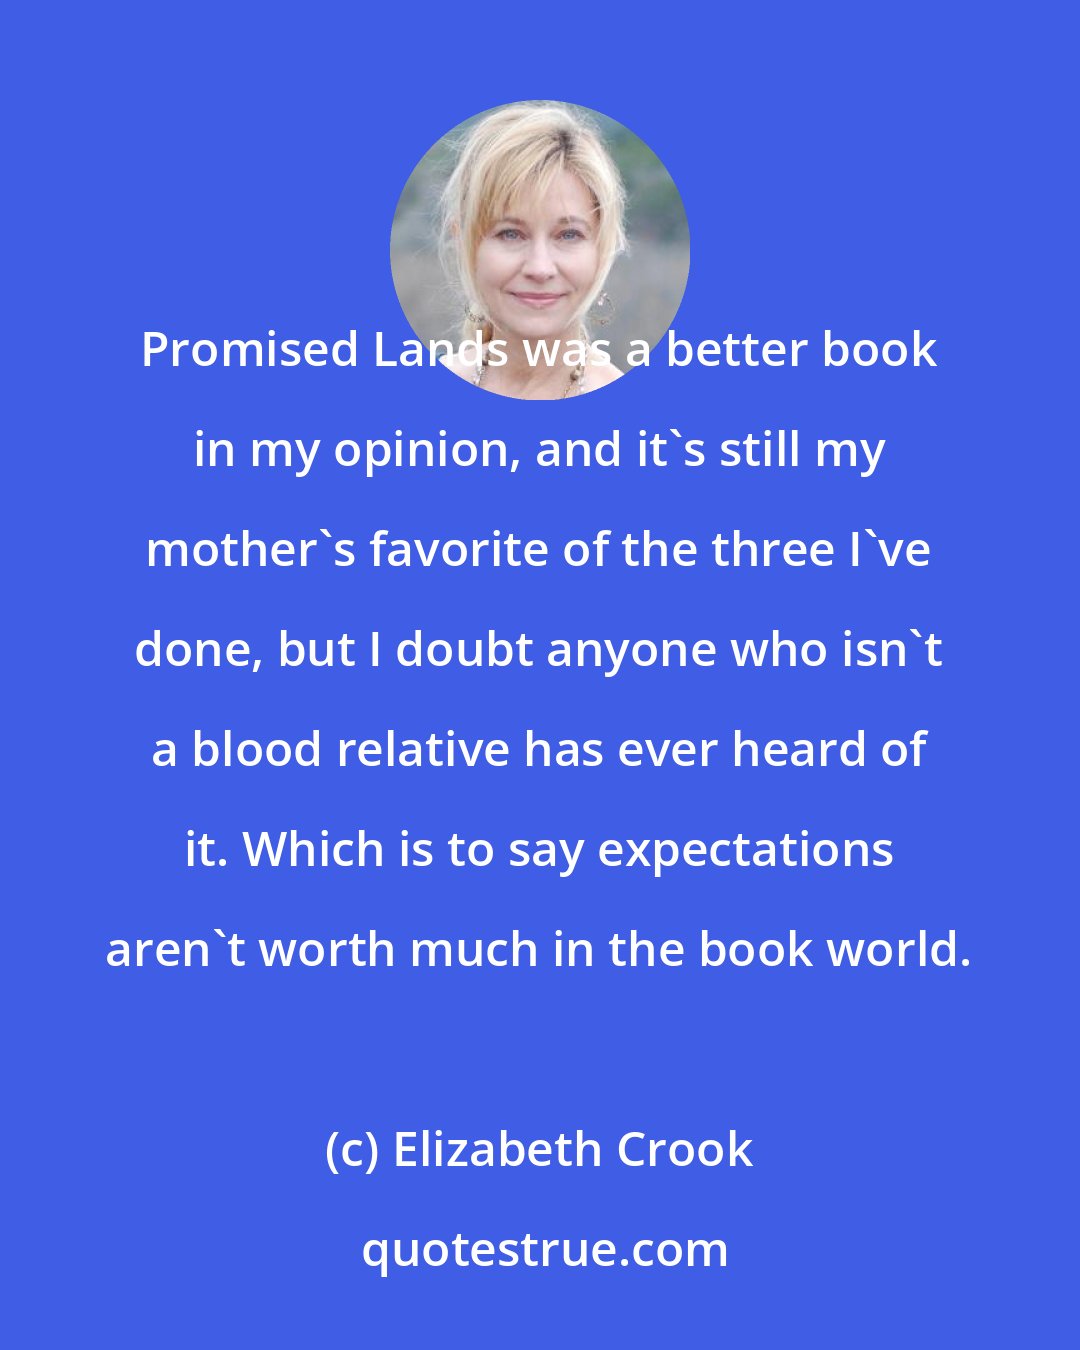 Elizabeth Crook: Promised Lands was a better book in my opinion, and it's still my mother's favorite of the three I've done, but I doubt anyone who isn't a blood relative has ever heard of it. Which is to say expectations aren't worth much in the book world.